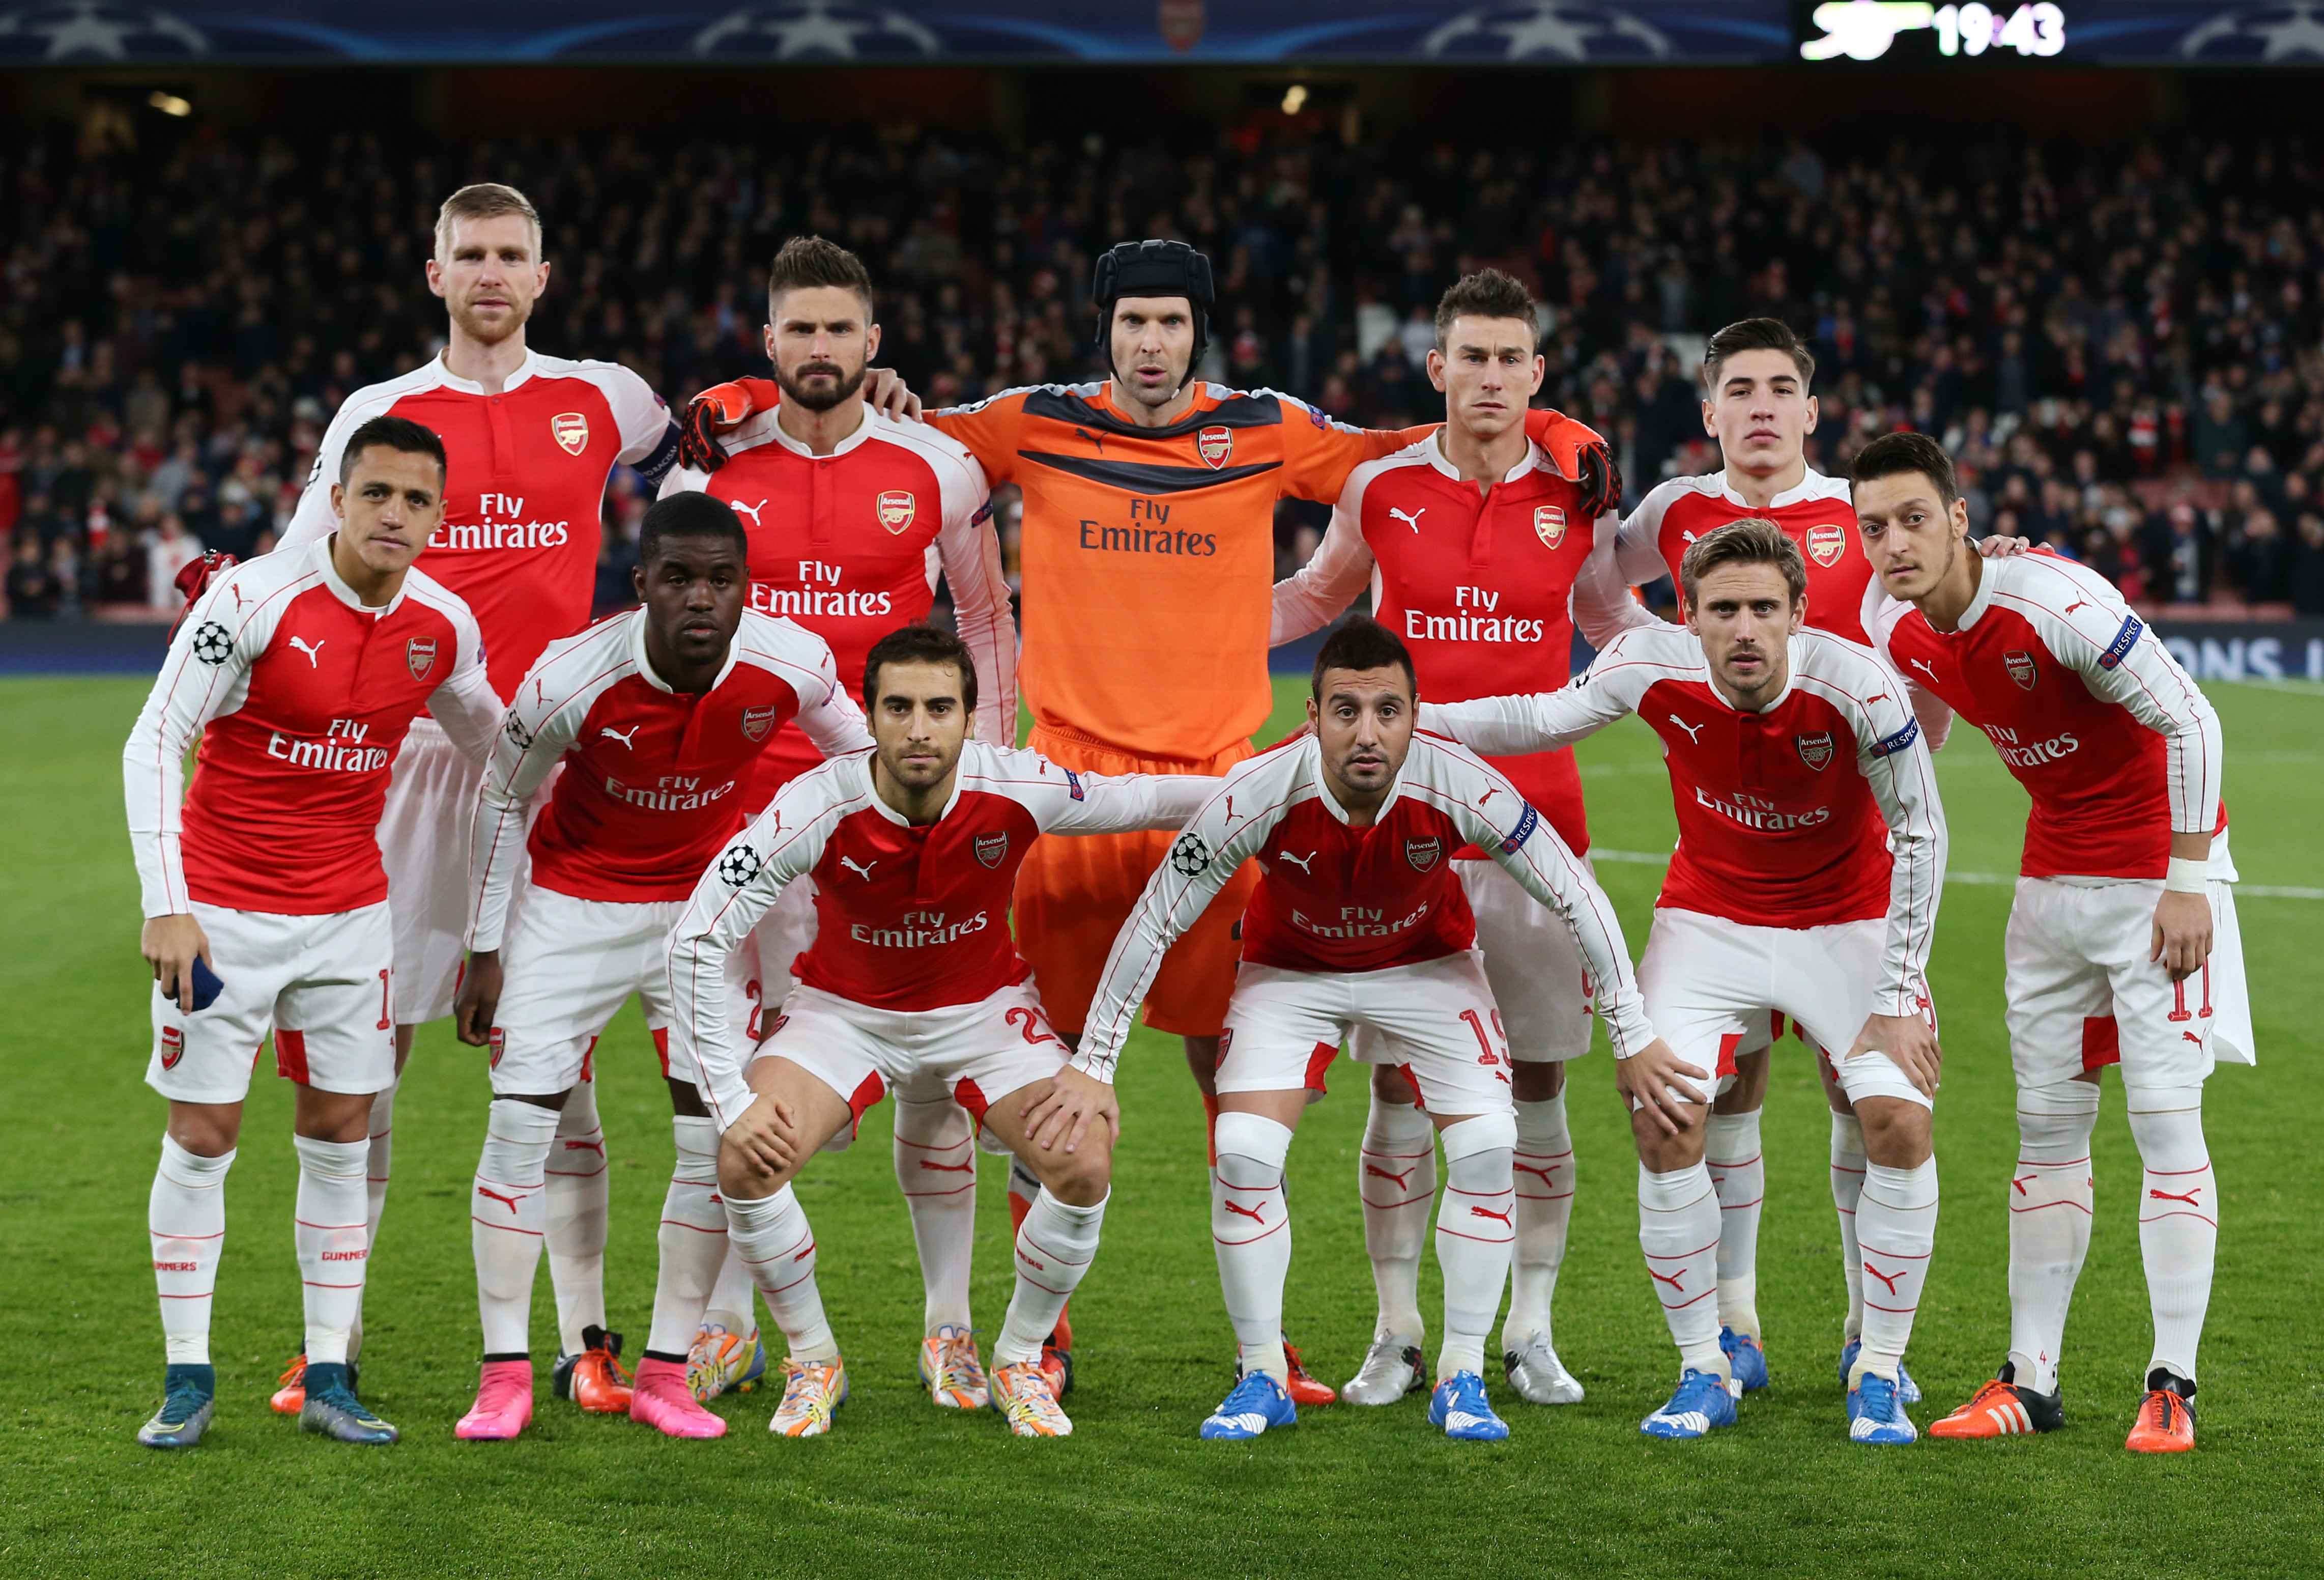 Nice Images Collection - Arsenal Group - HD Wallpaper 